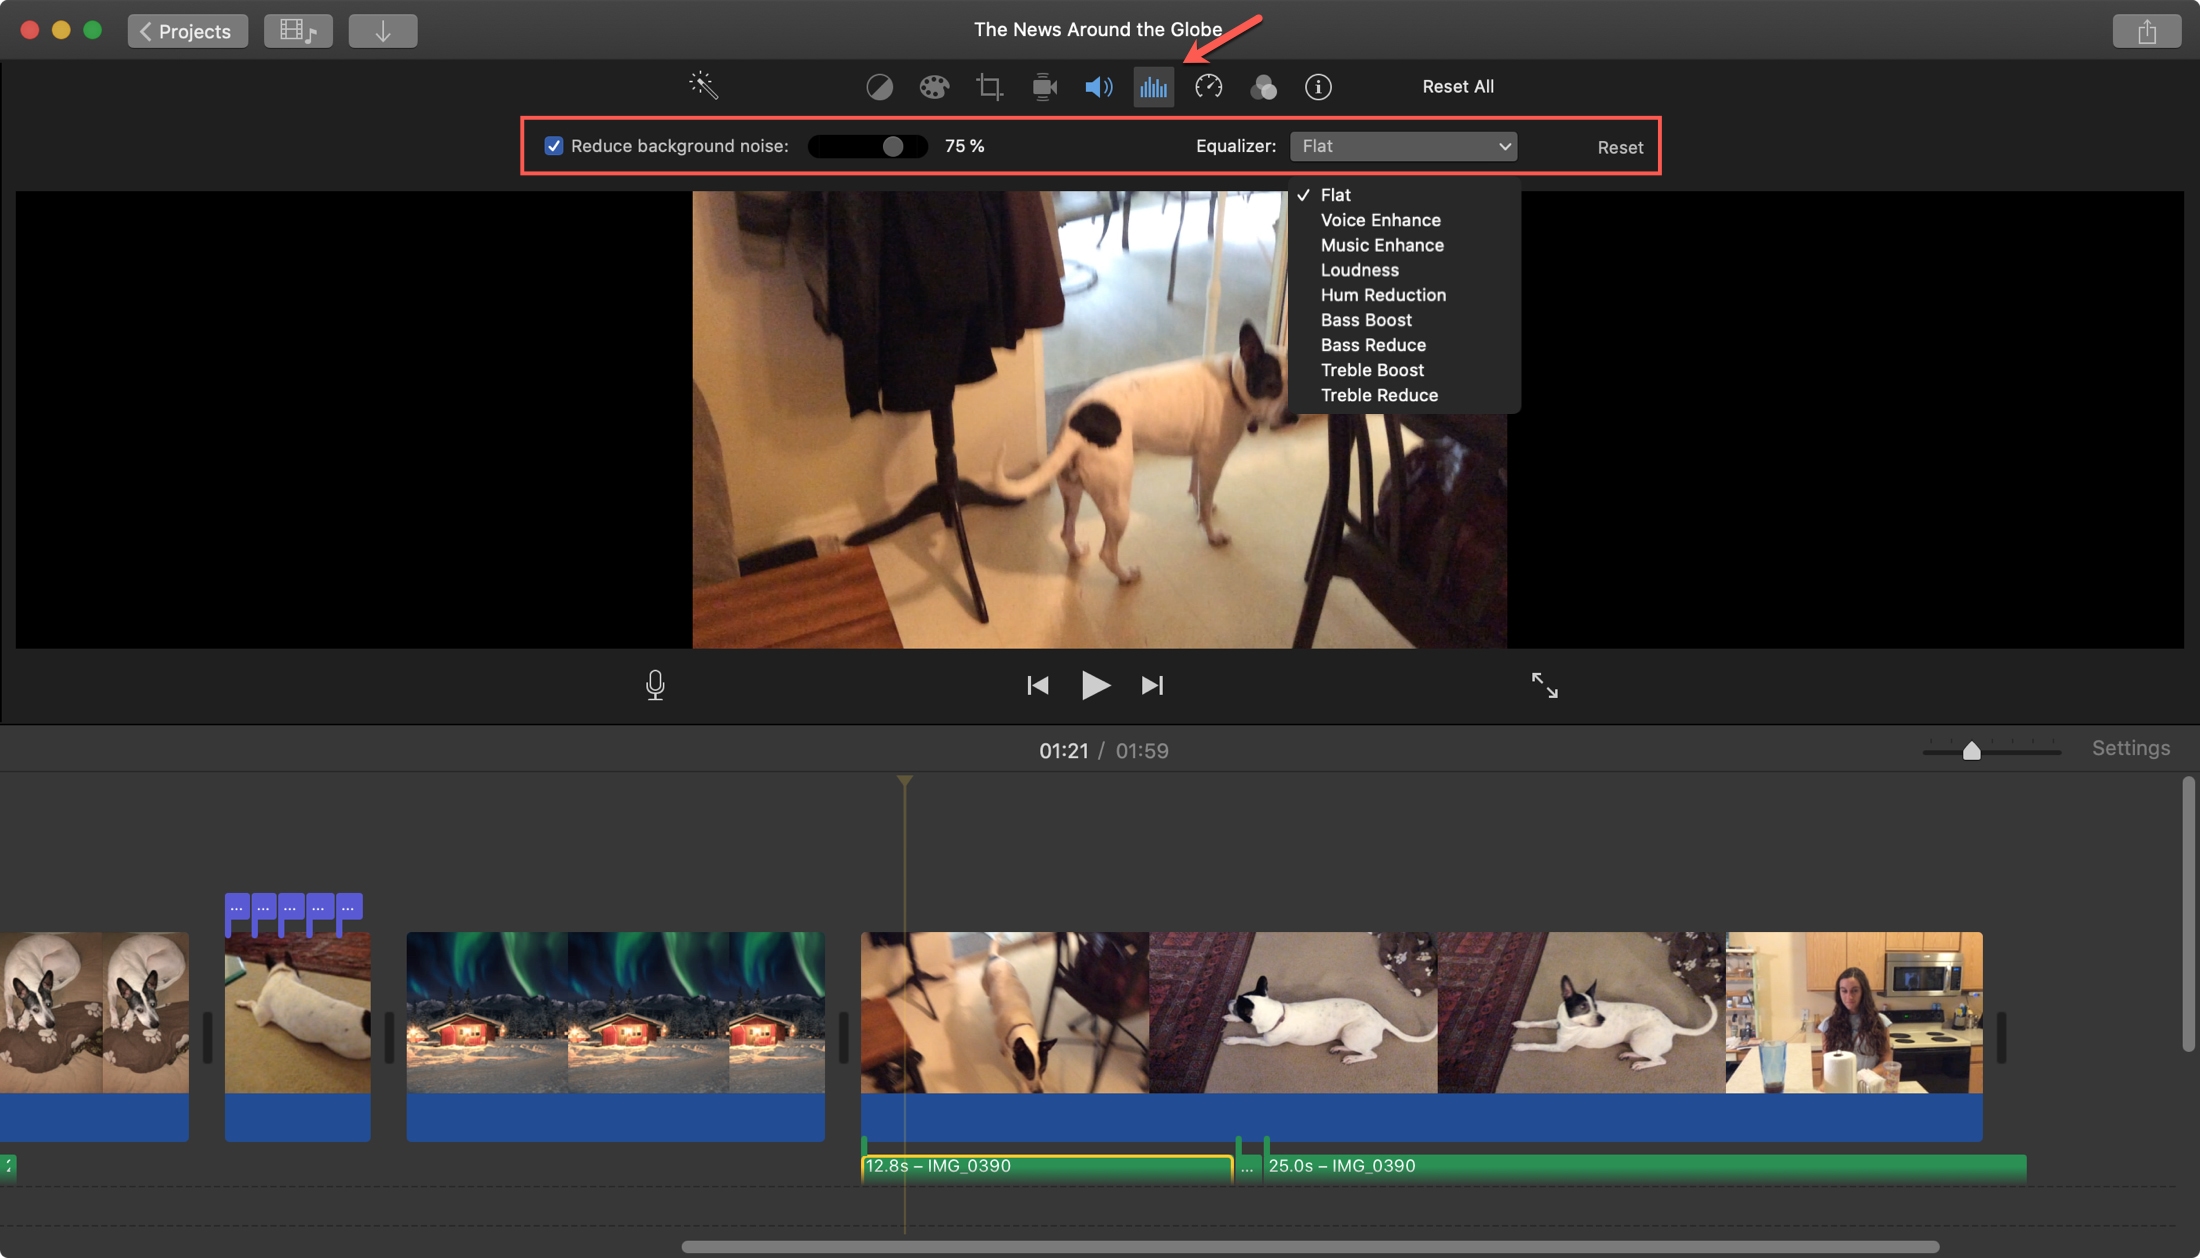 How To Reduce Background Noise In Imovie